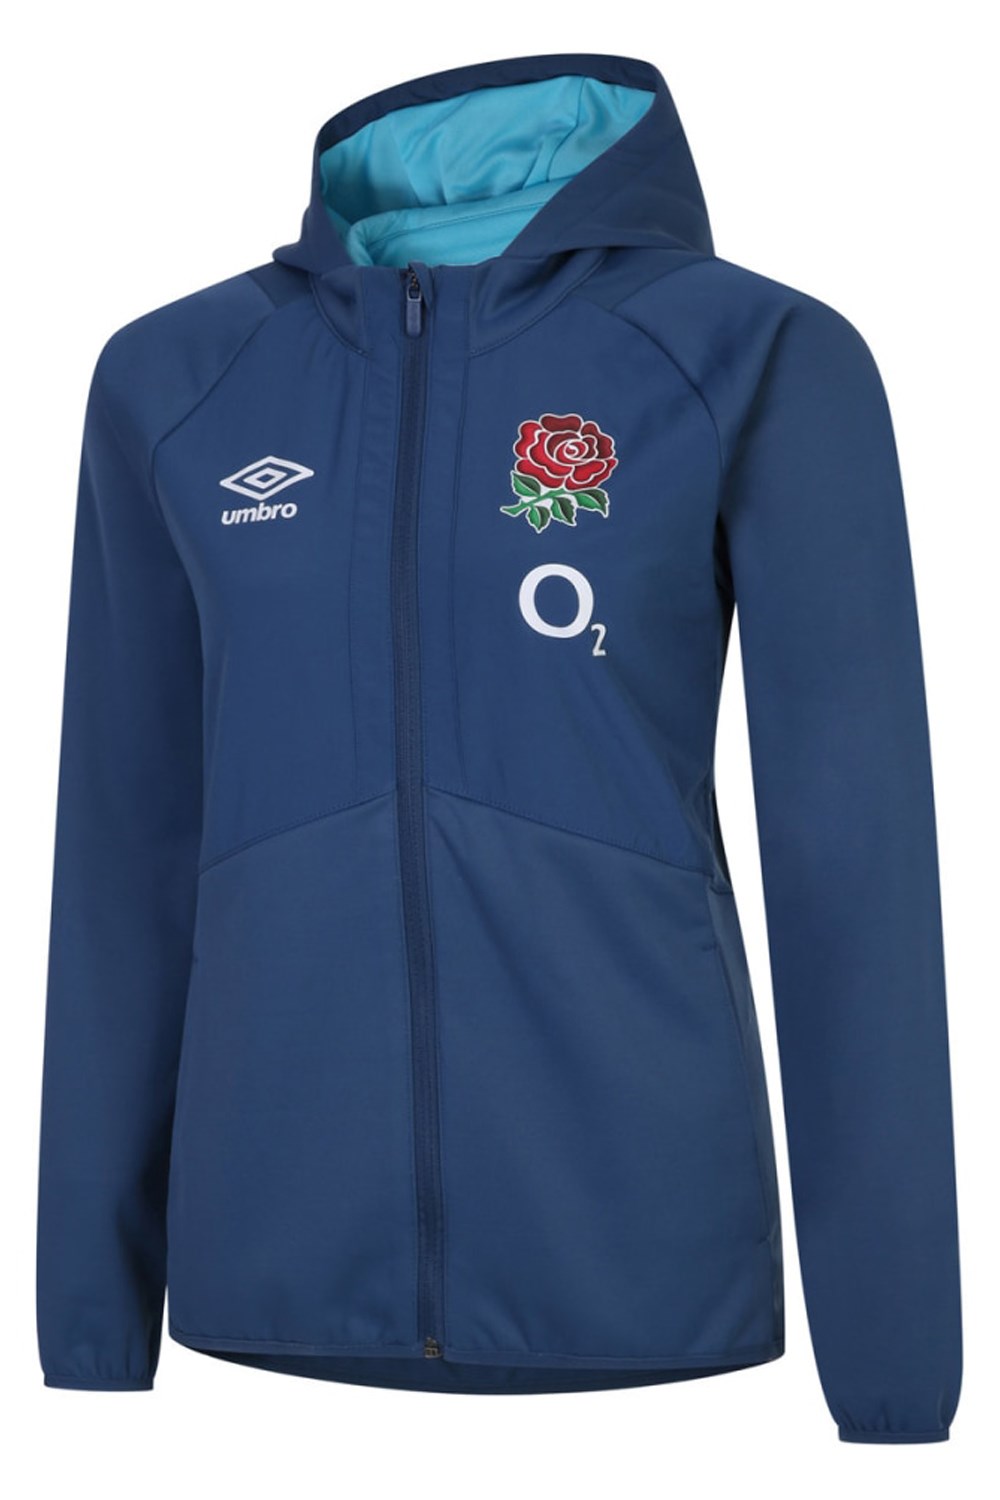 England Rugby Womens 22/23 Full Zip Jacket -